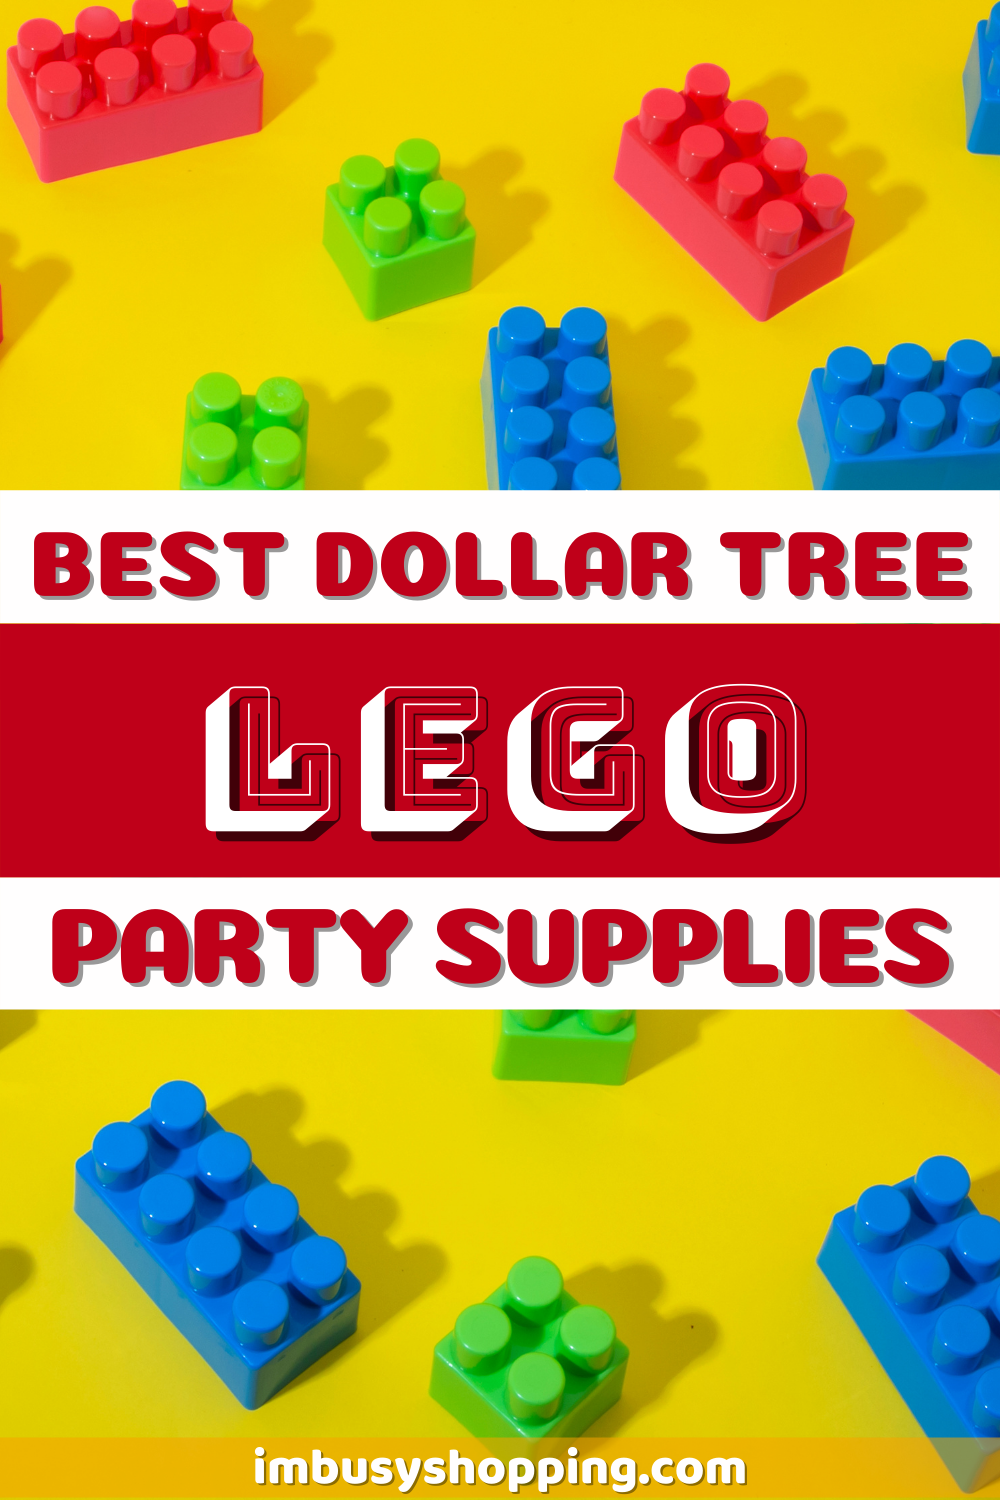 Pin showing the Best Dollar Tree Lego Party Supplies